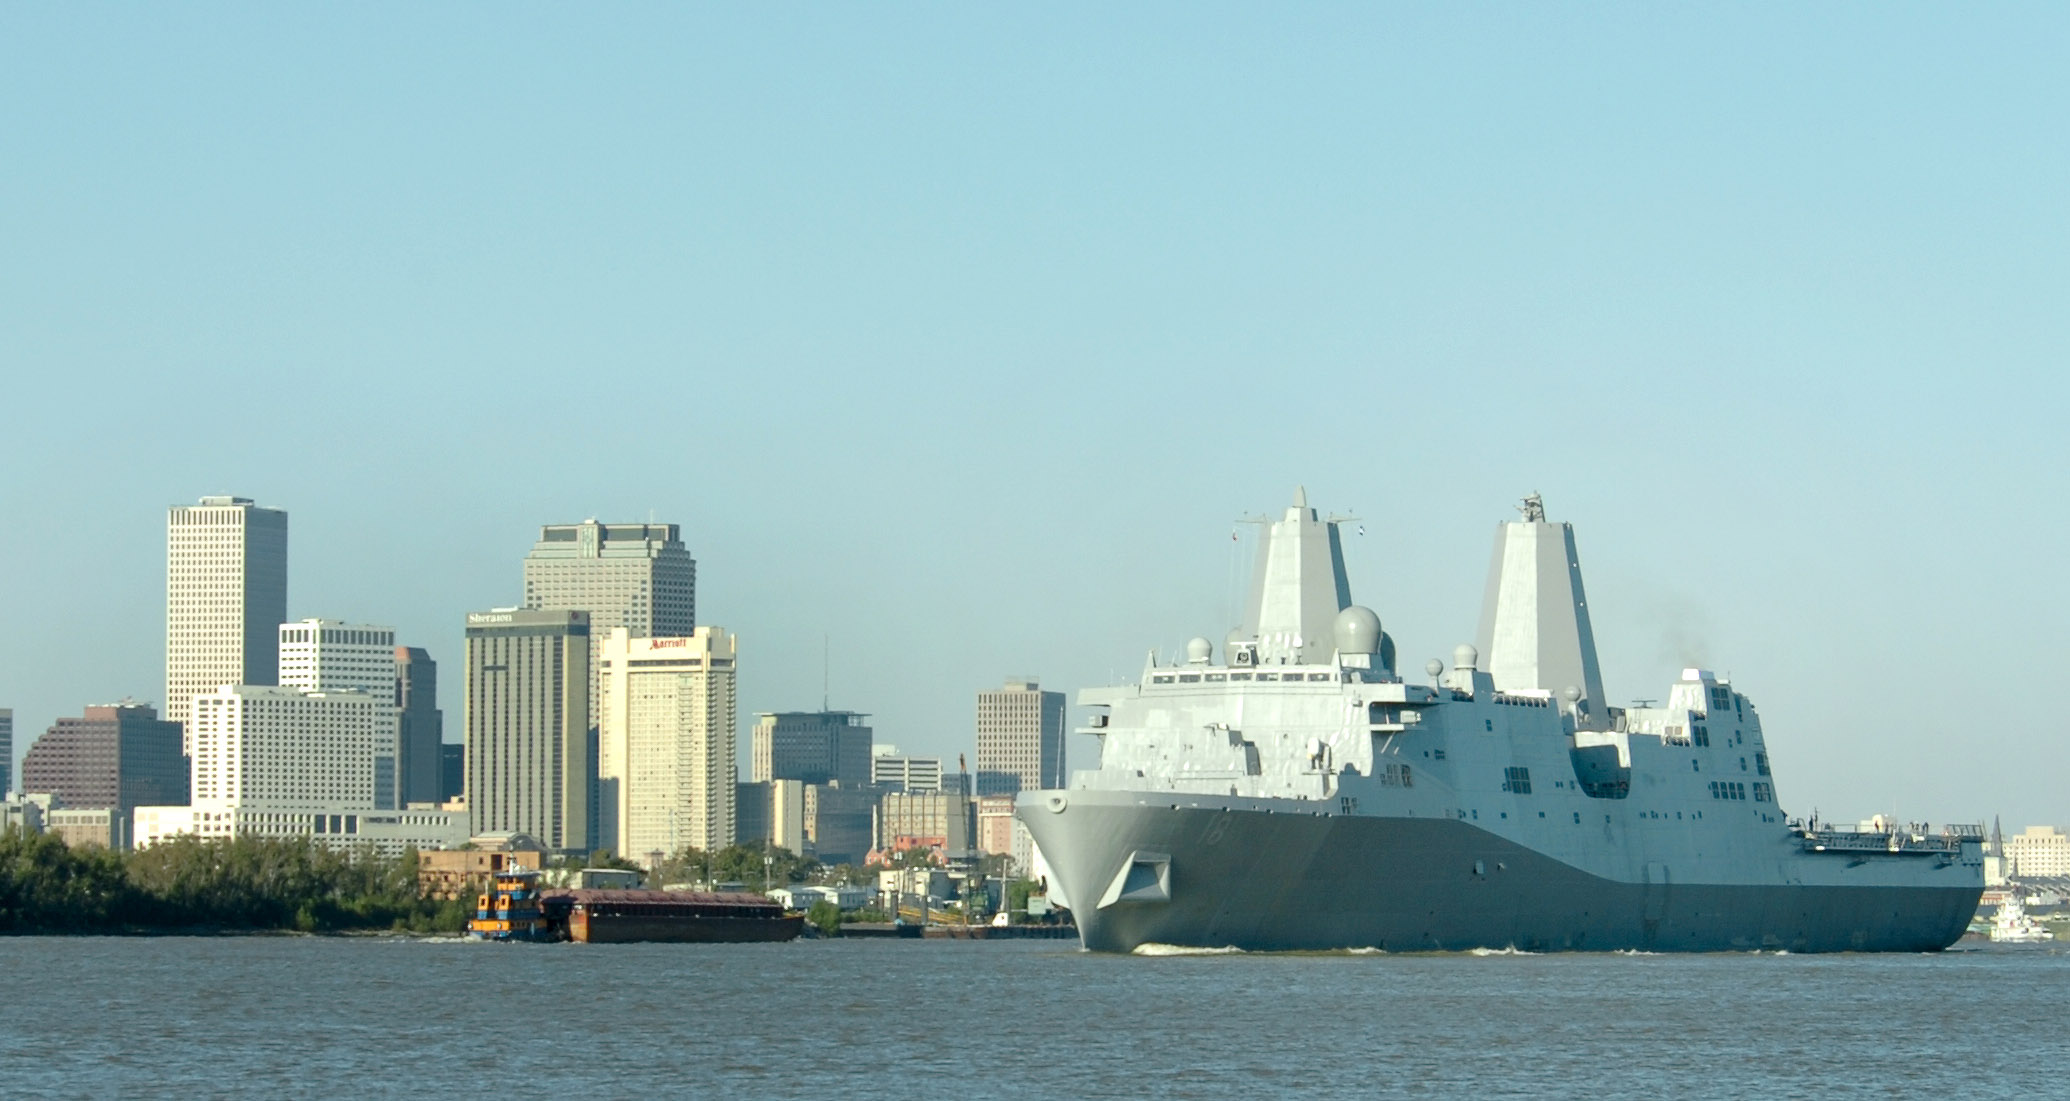 US Navy 061023-N-9995B-002 The Pre-Commissioning Unit New Orleans (LPD 18) transits past the city of New Orleans on the Mississippi River